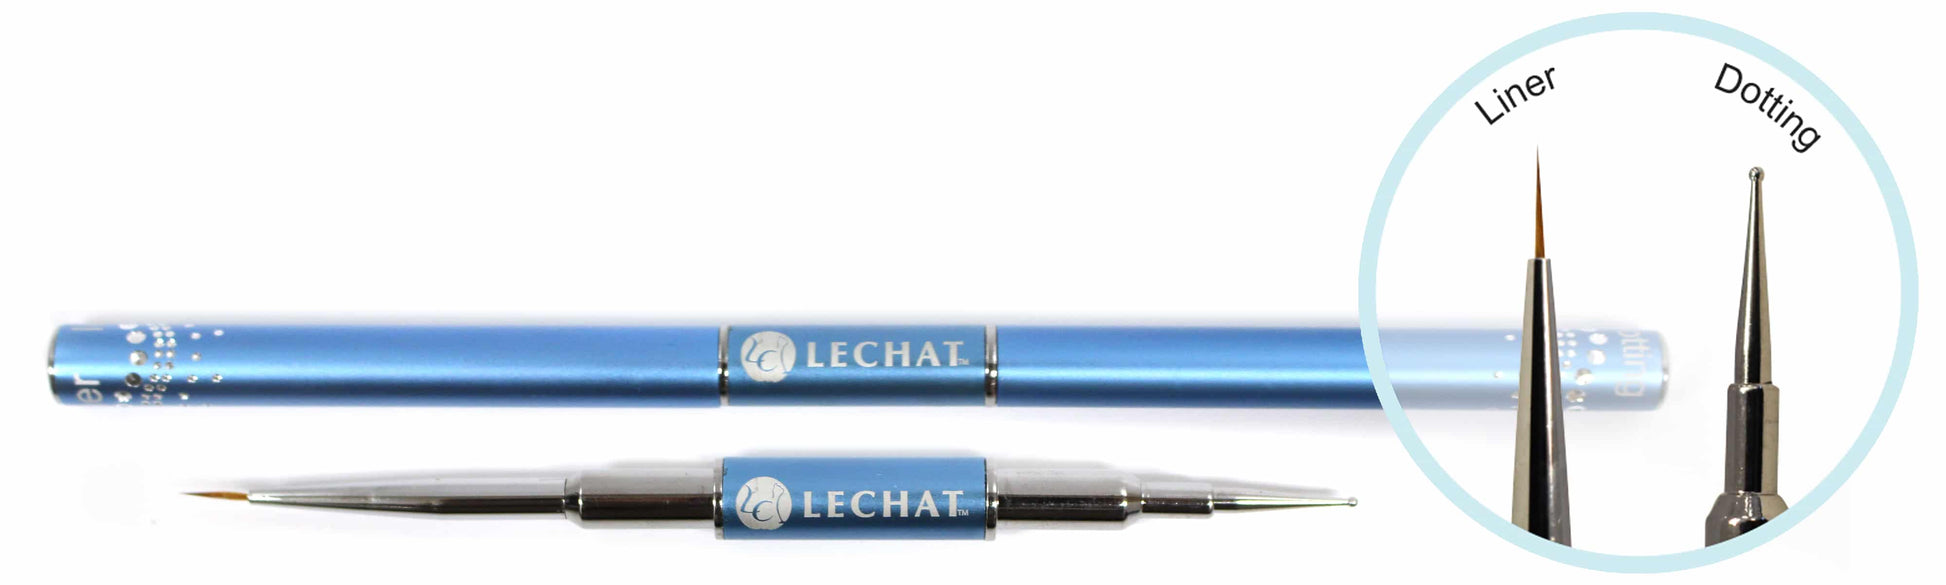 Lechat - Brush Twin Head Liner size 4- #LCTHB01 - Premier Nail Supply 